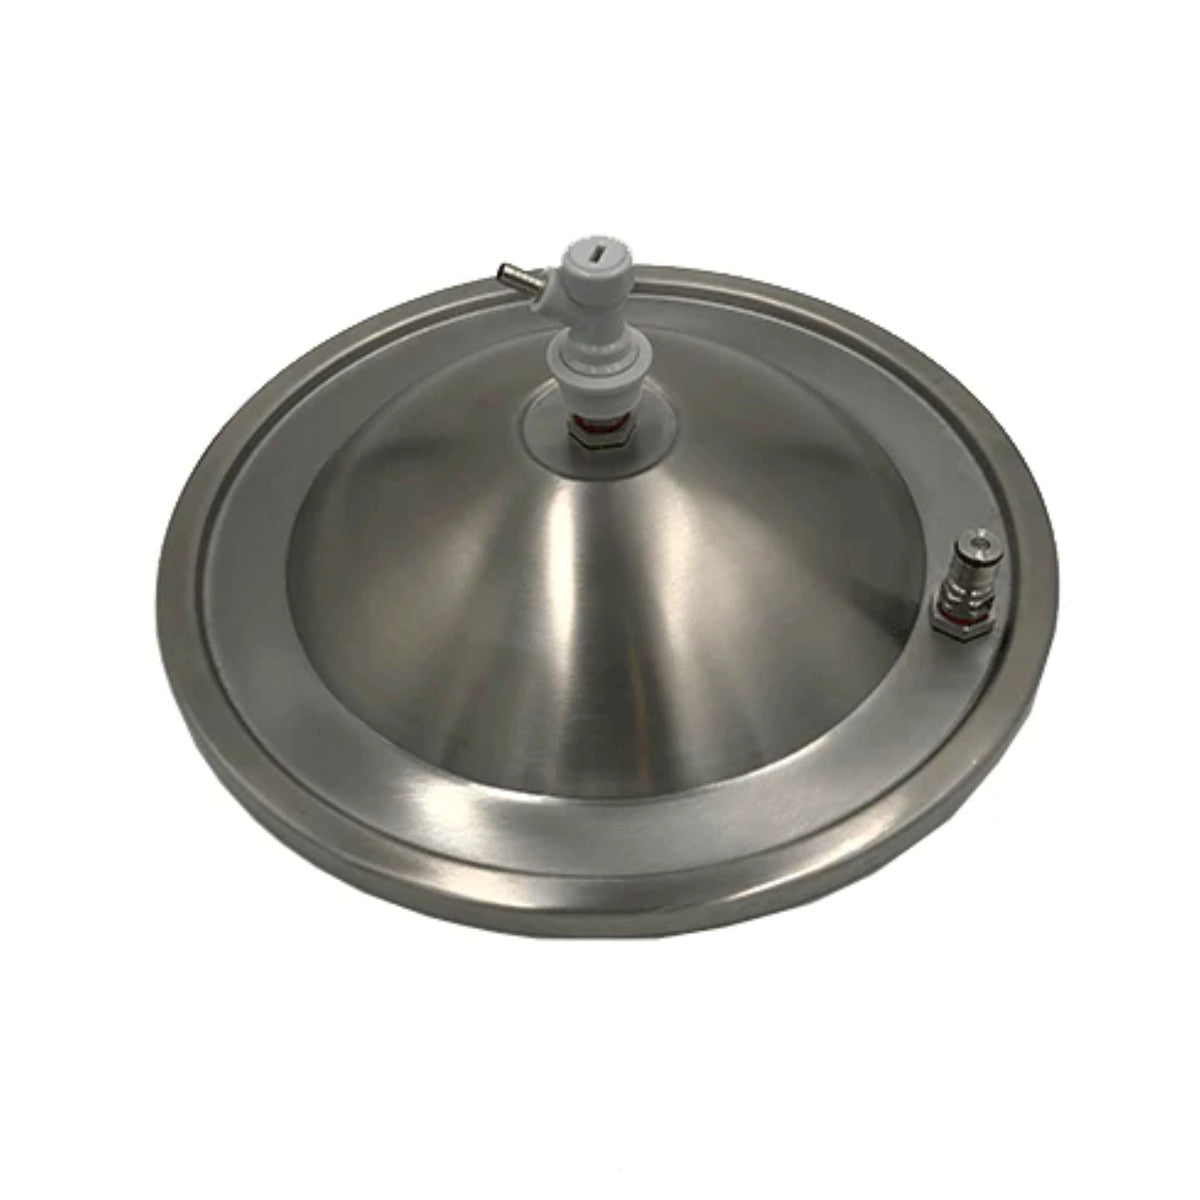 lid with weldless stainless steel ball lock gas bulkhead